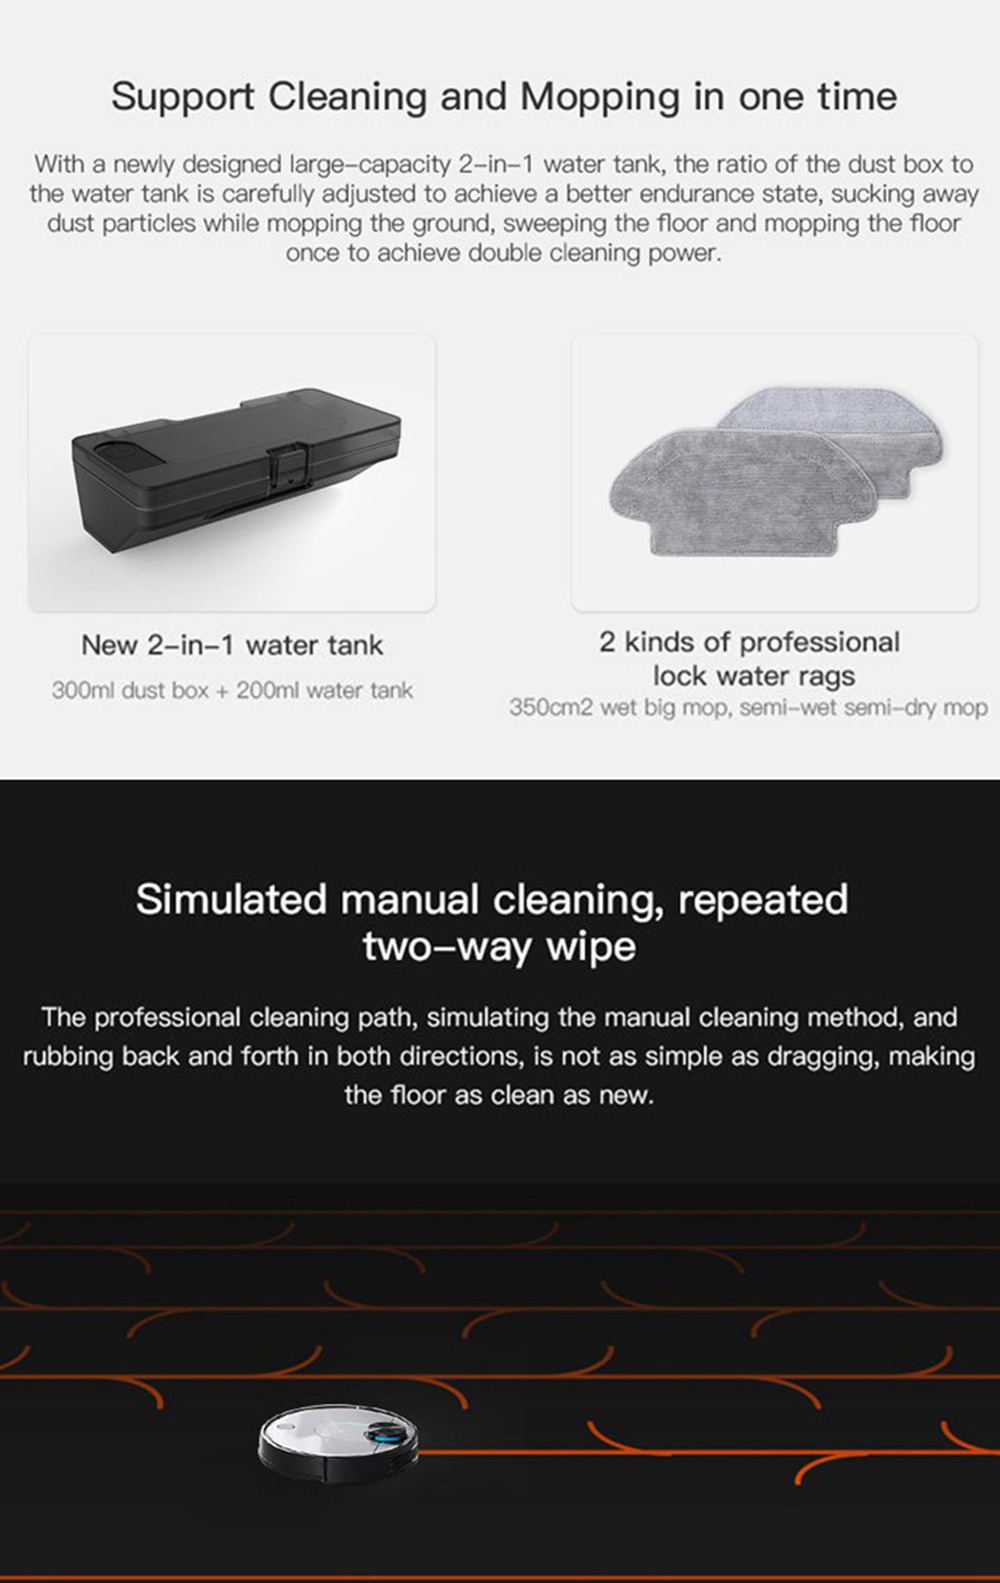 Xiaomi VIOMI Robot Vacuum Cleaner Robot V2 Pro smart cleaning 2100pa High suction - Gray